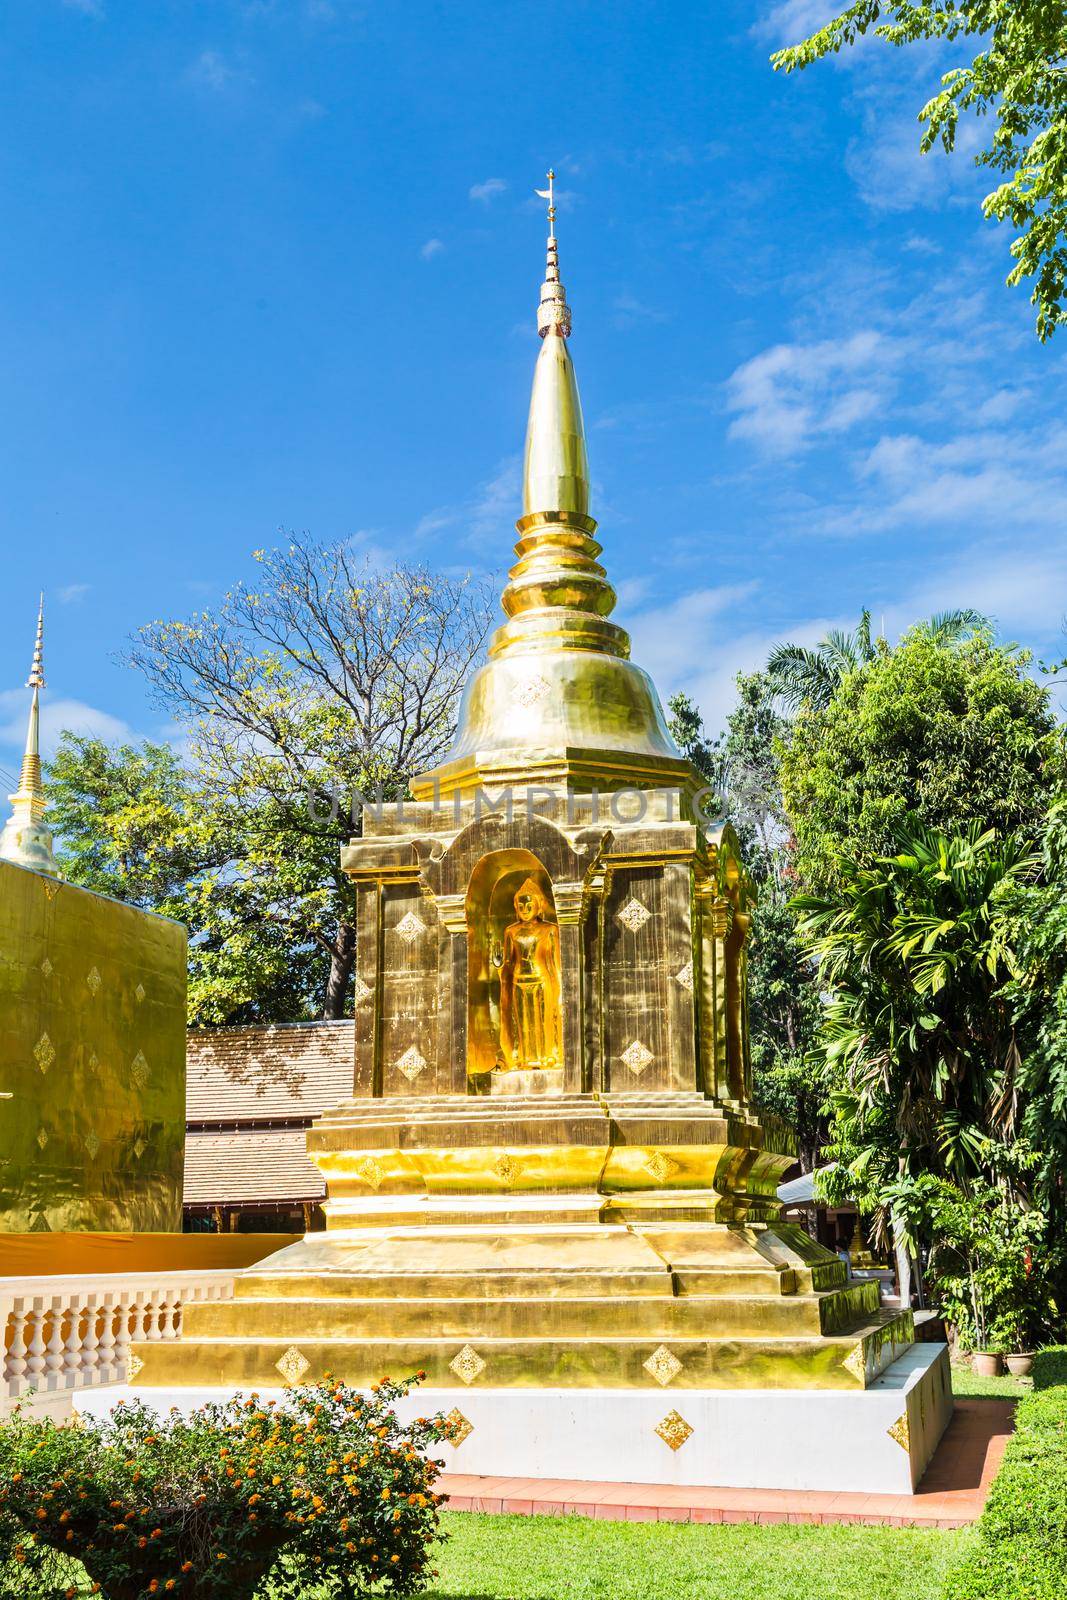 Beautiful golden pagoda with blue sky at Wat Phra Singh in Chiang Mai, Thailand.